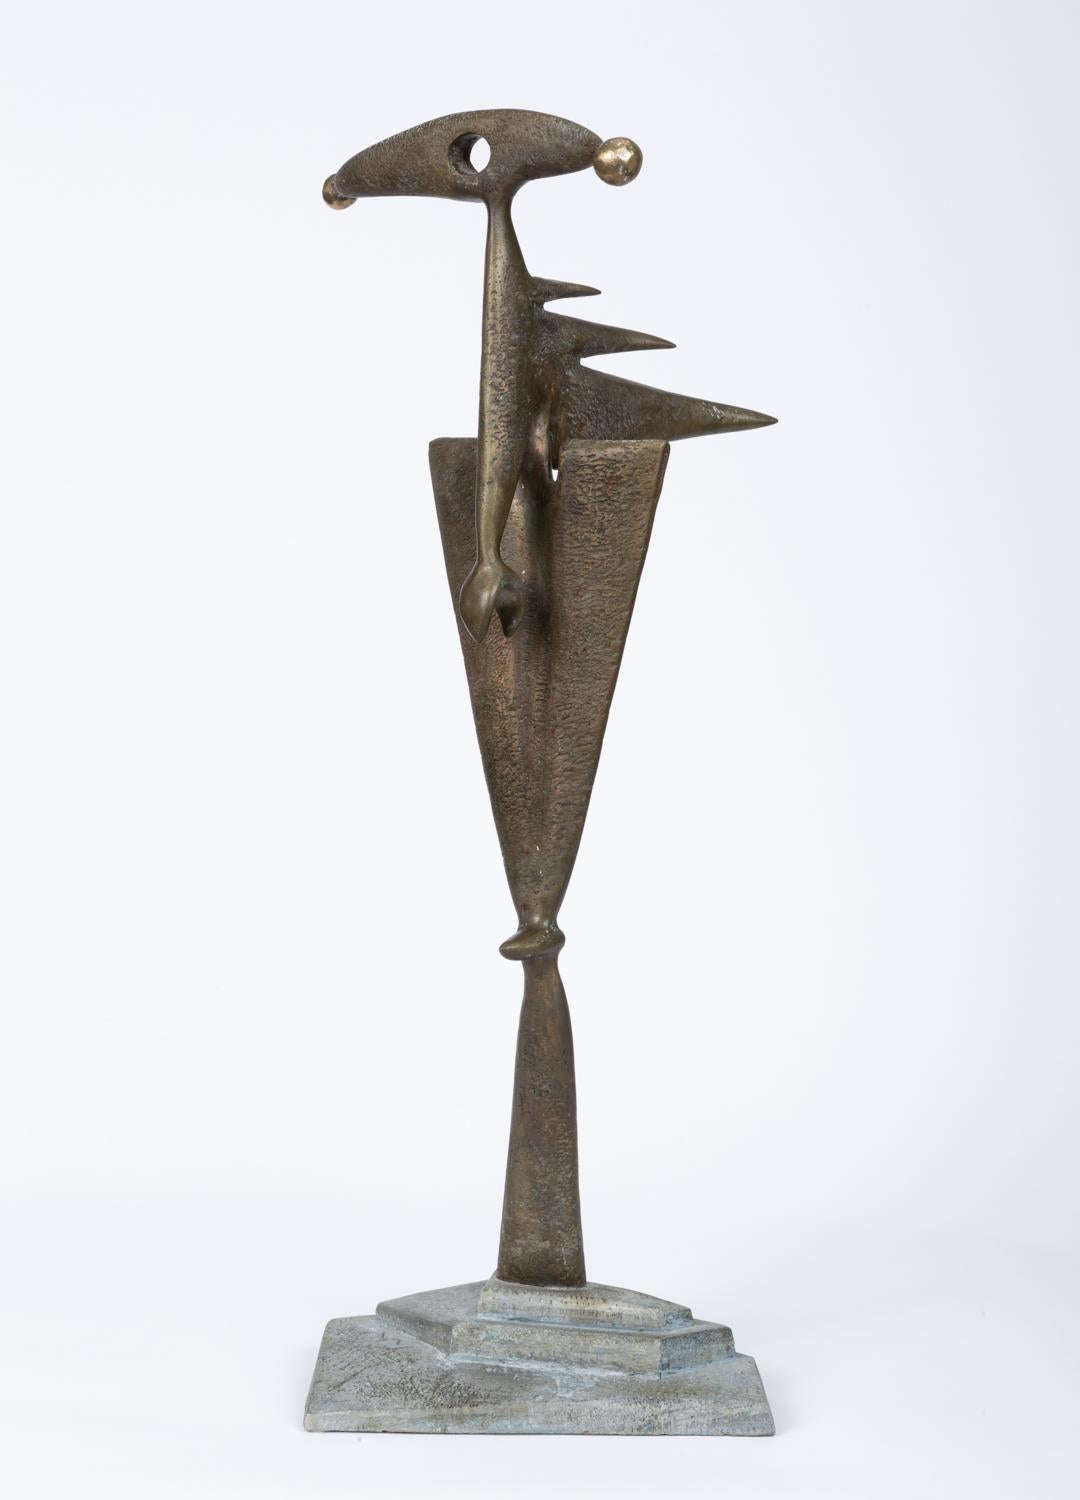 While working at the foundry at the Cosanti Foundation, Native American artist Michael McCleve was included one of the first features of native art in a national US magazine, Art in America, in 1972. This abstract bronze sculpture, about 30” in